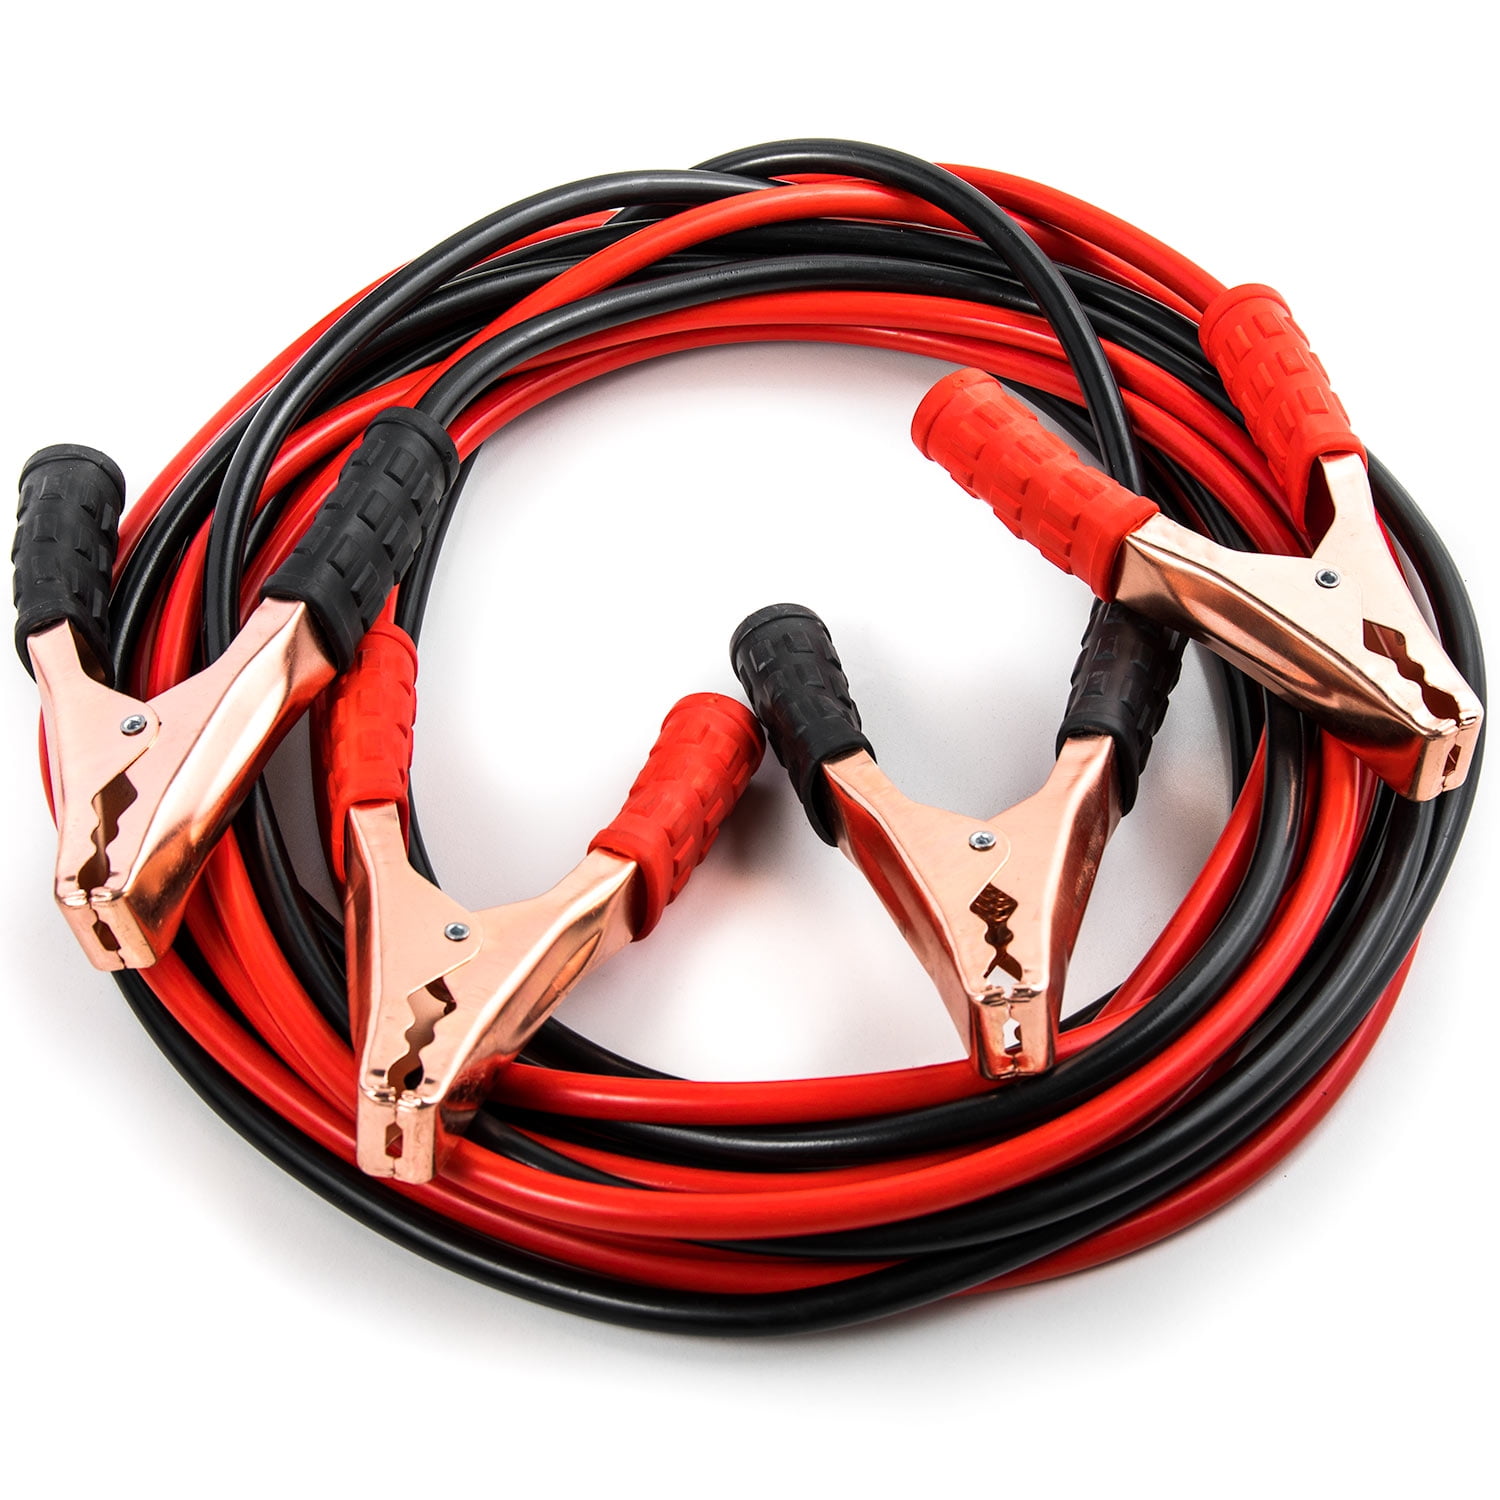 4Gauge x 20Ft Battery Cables with UL-Listed Clamps THIKPO G420 Heavy Duty Jumper Cables 600A Peak Booster Cables for Car SUV and Trucks with up to 5-Liter Gasoline and 3-Liter Diesel Engines